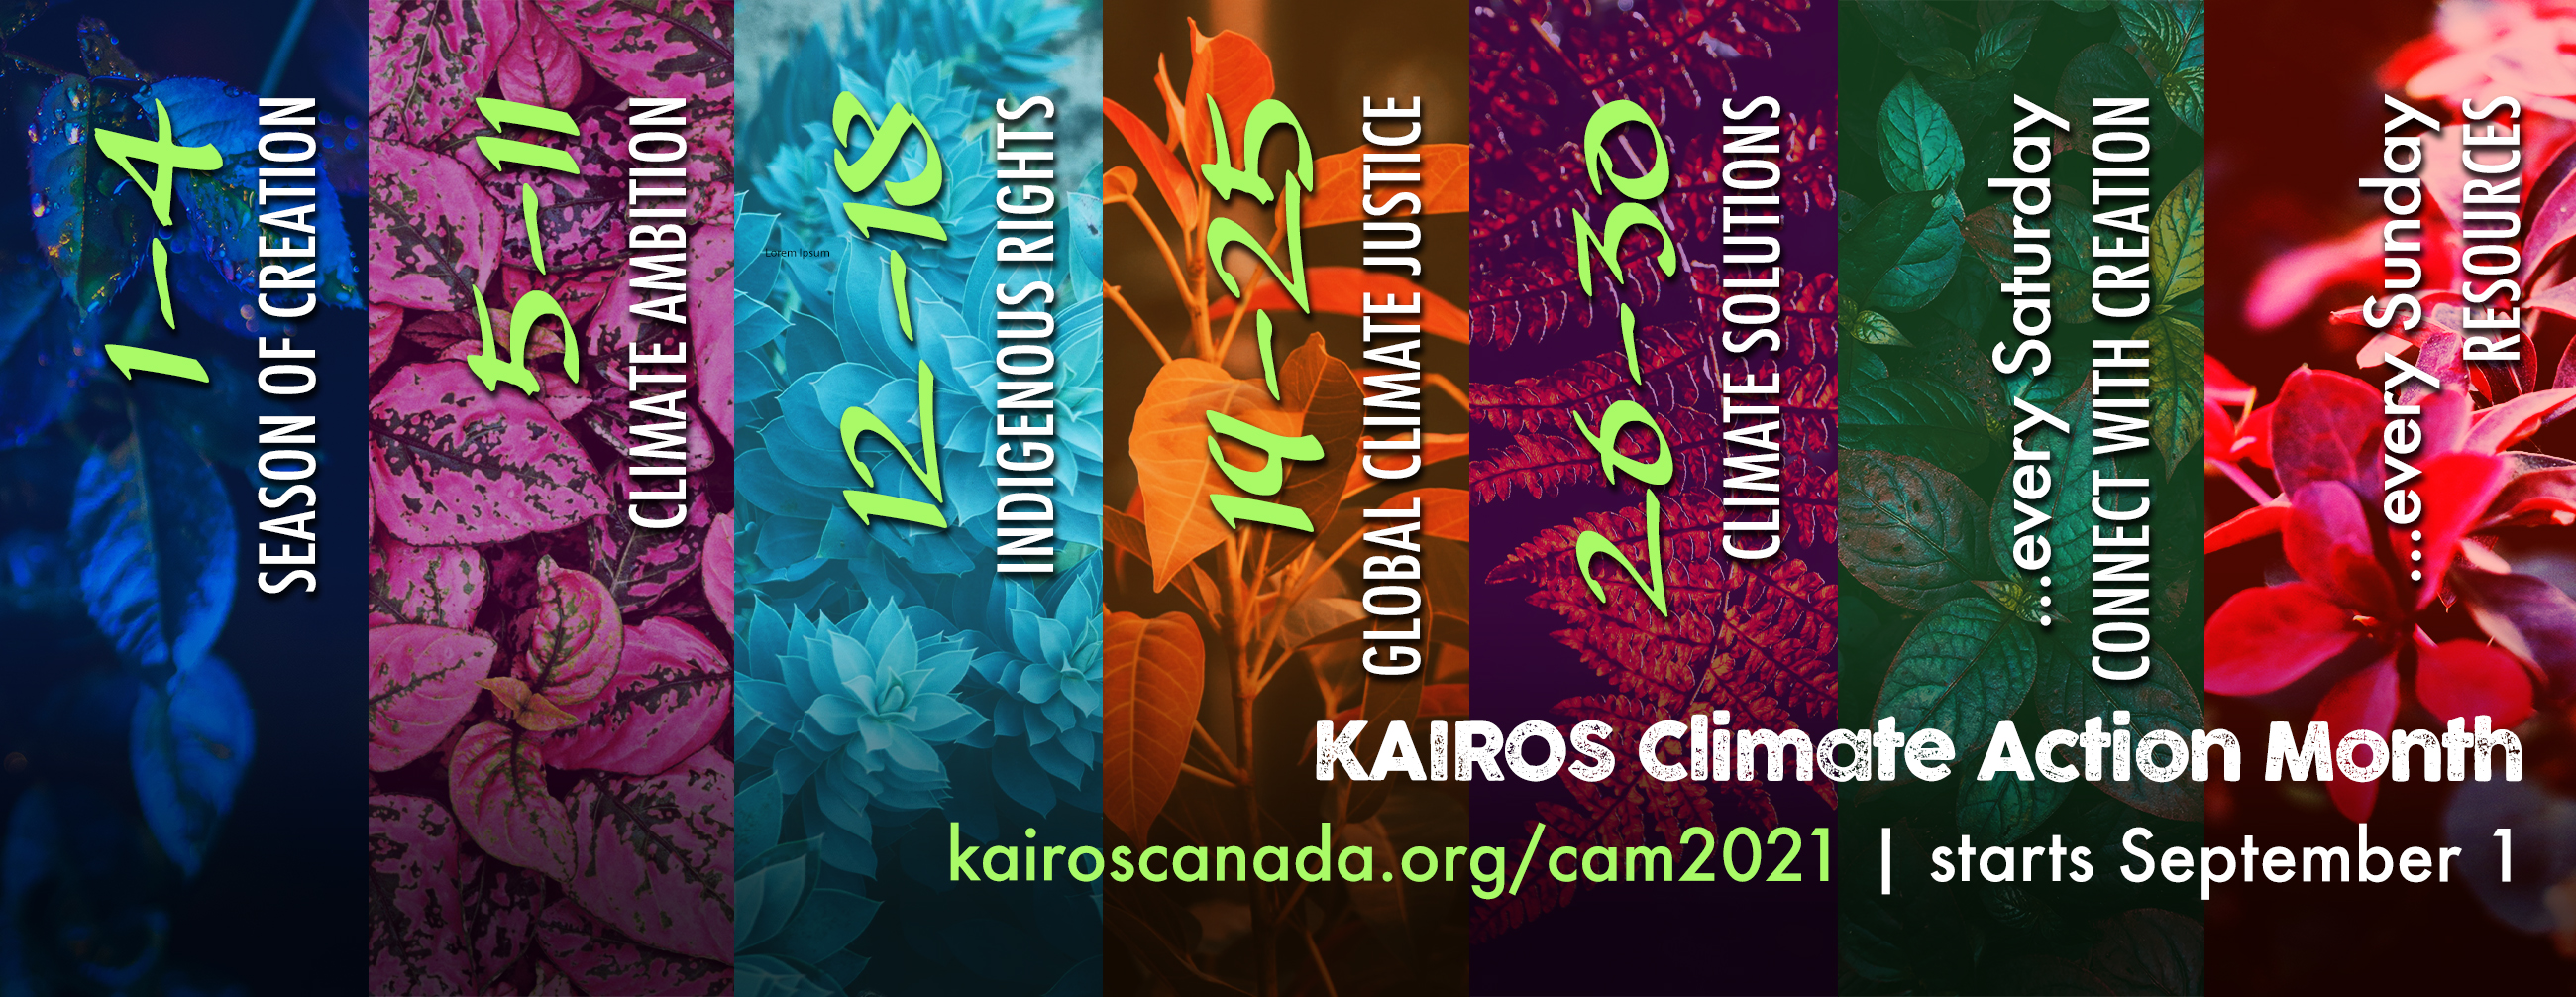 KAIROS Climate Action Month graphic